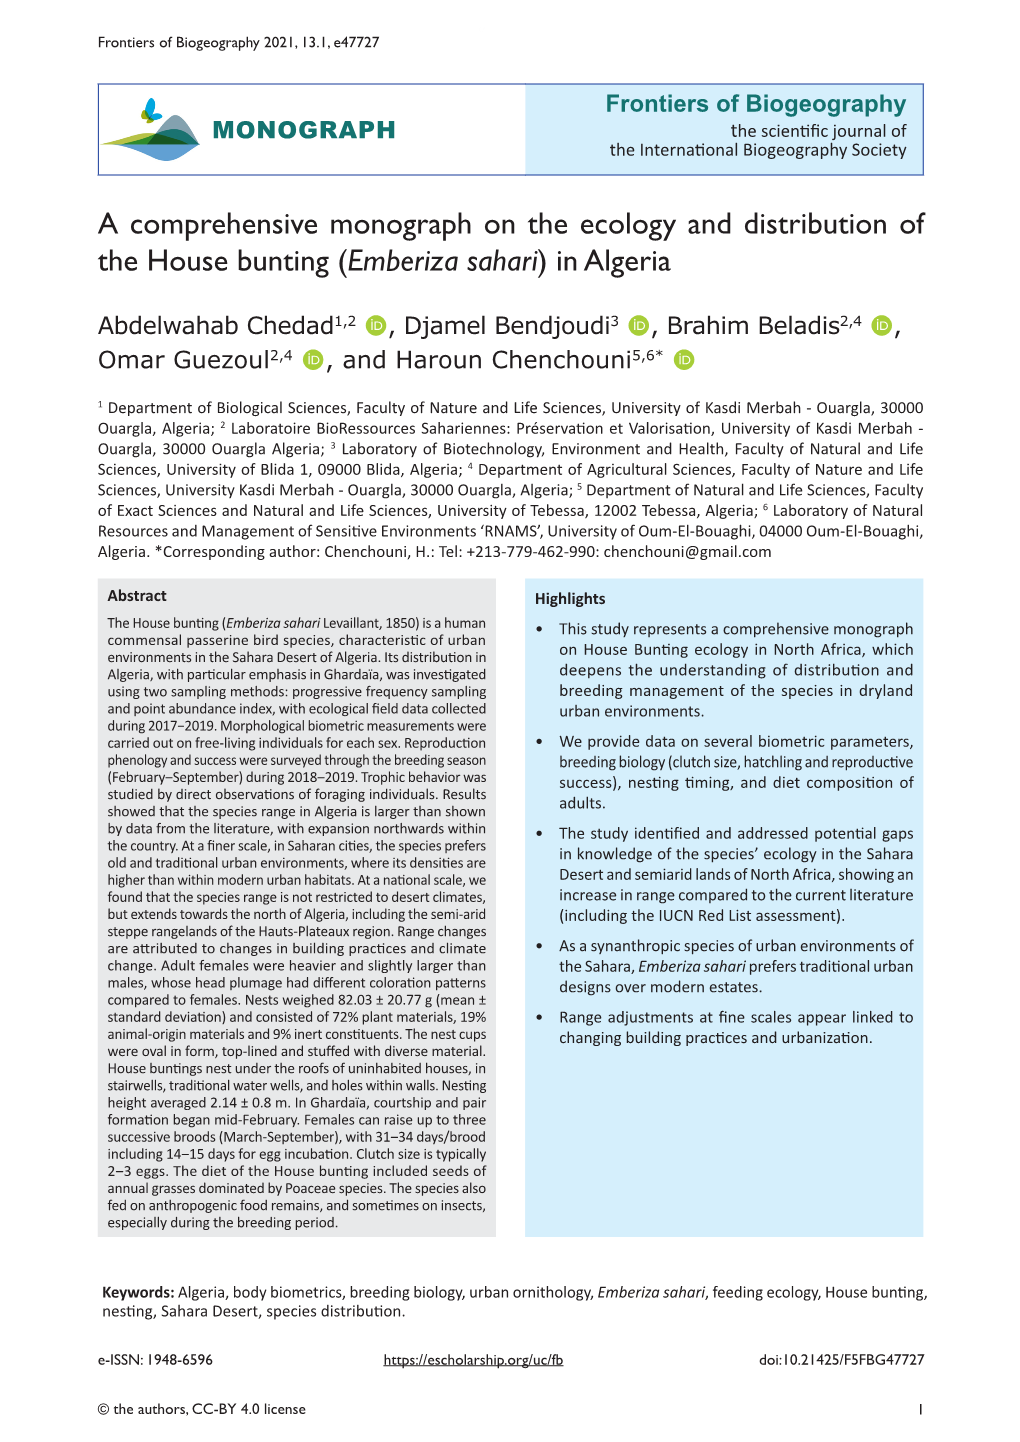 A Comprehensive Monograph on the Ecology and Distribution of the House Bunting (Emberiza Sahari) in Algeria